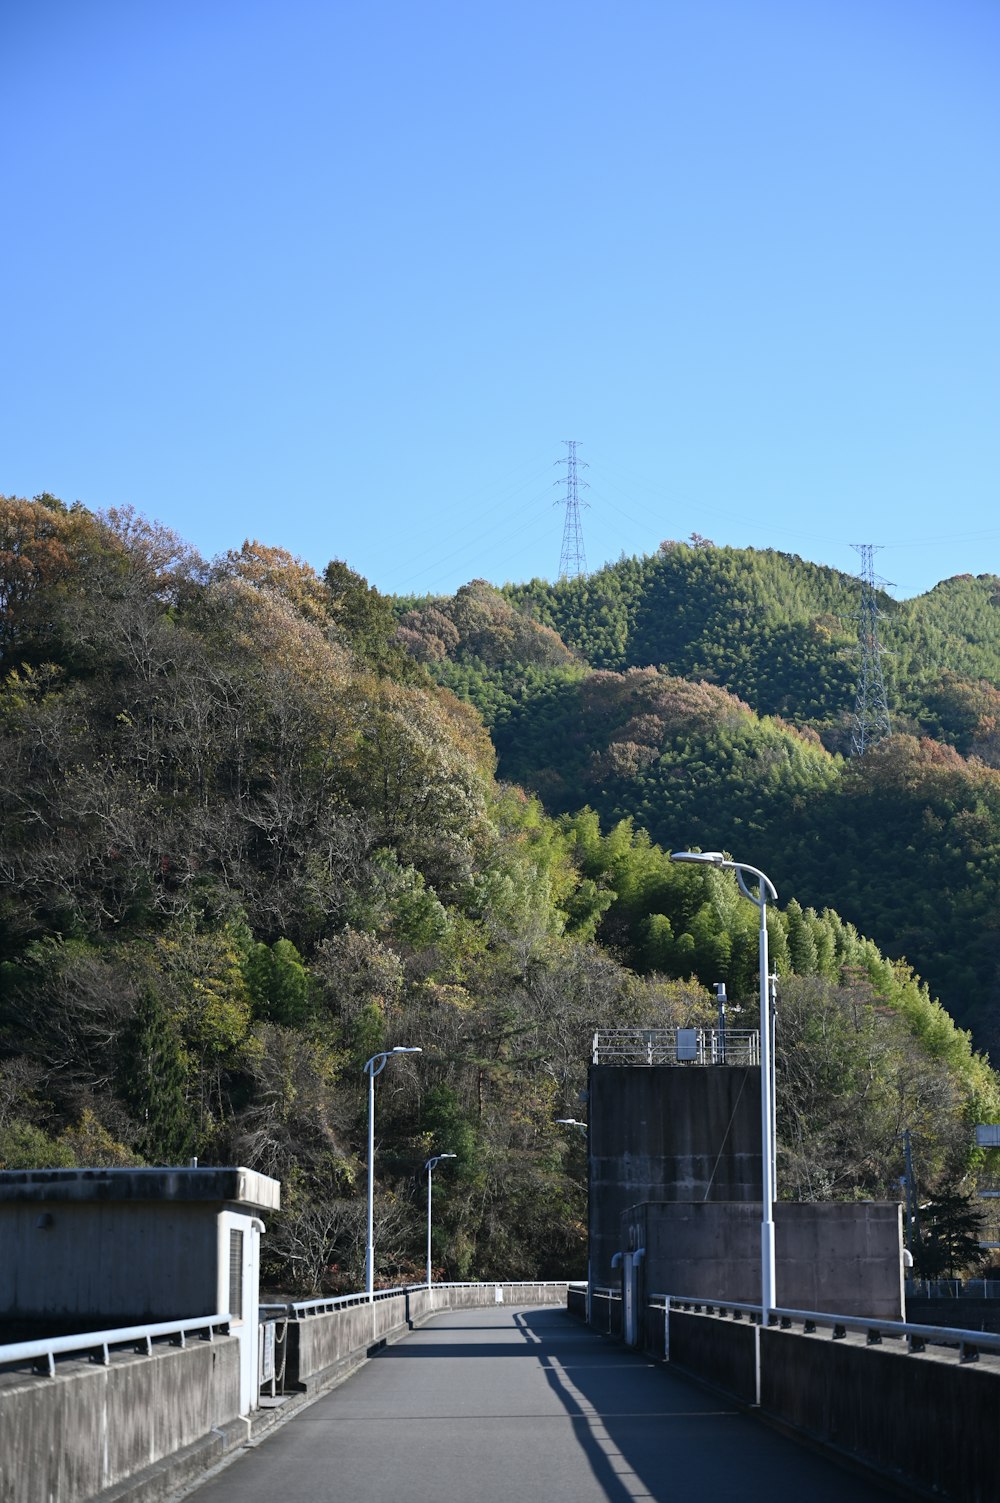 a view of a bridge with hills in the background